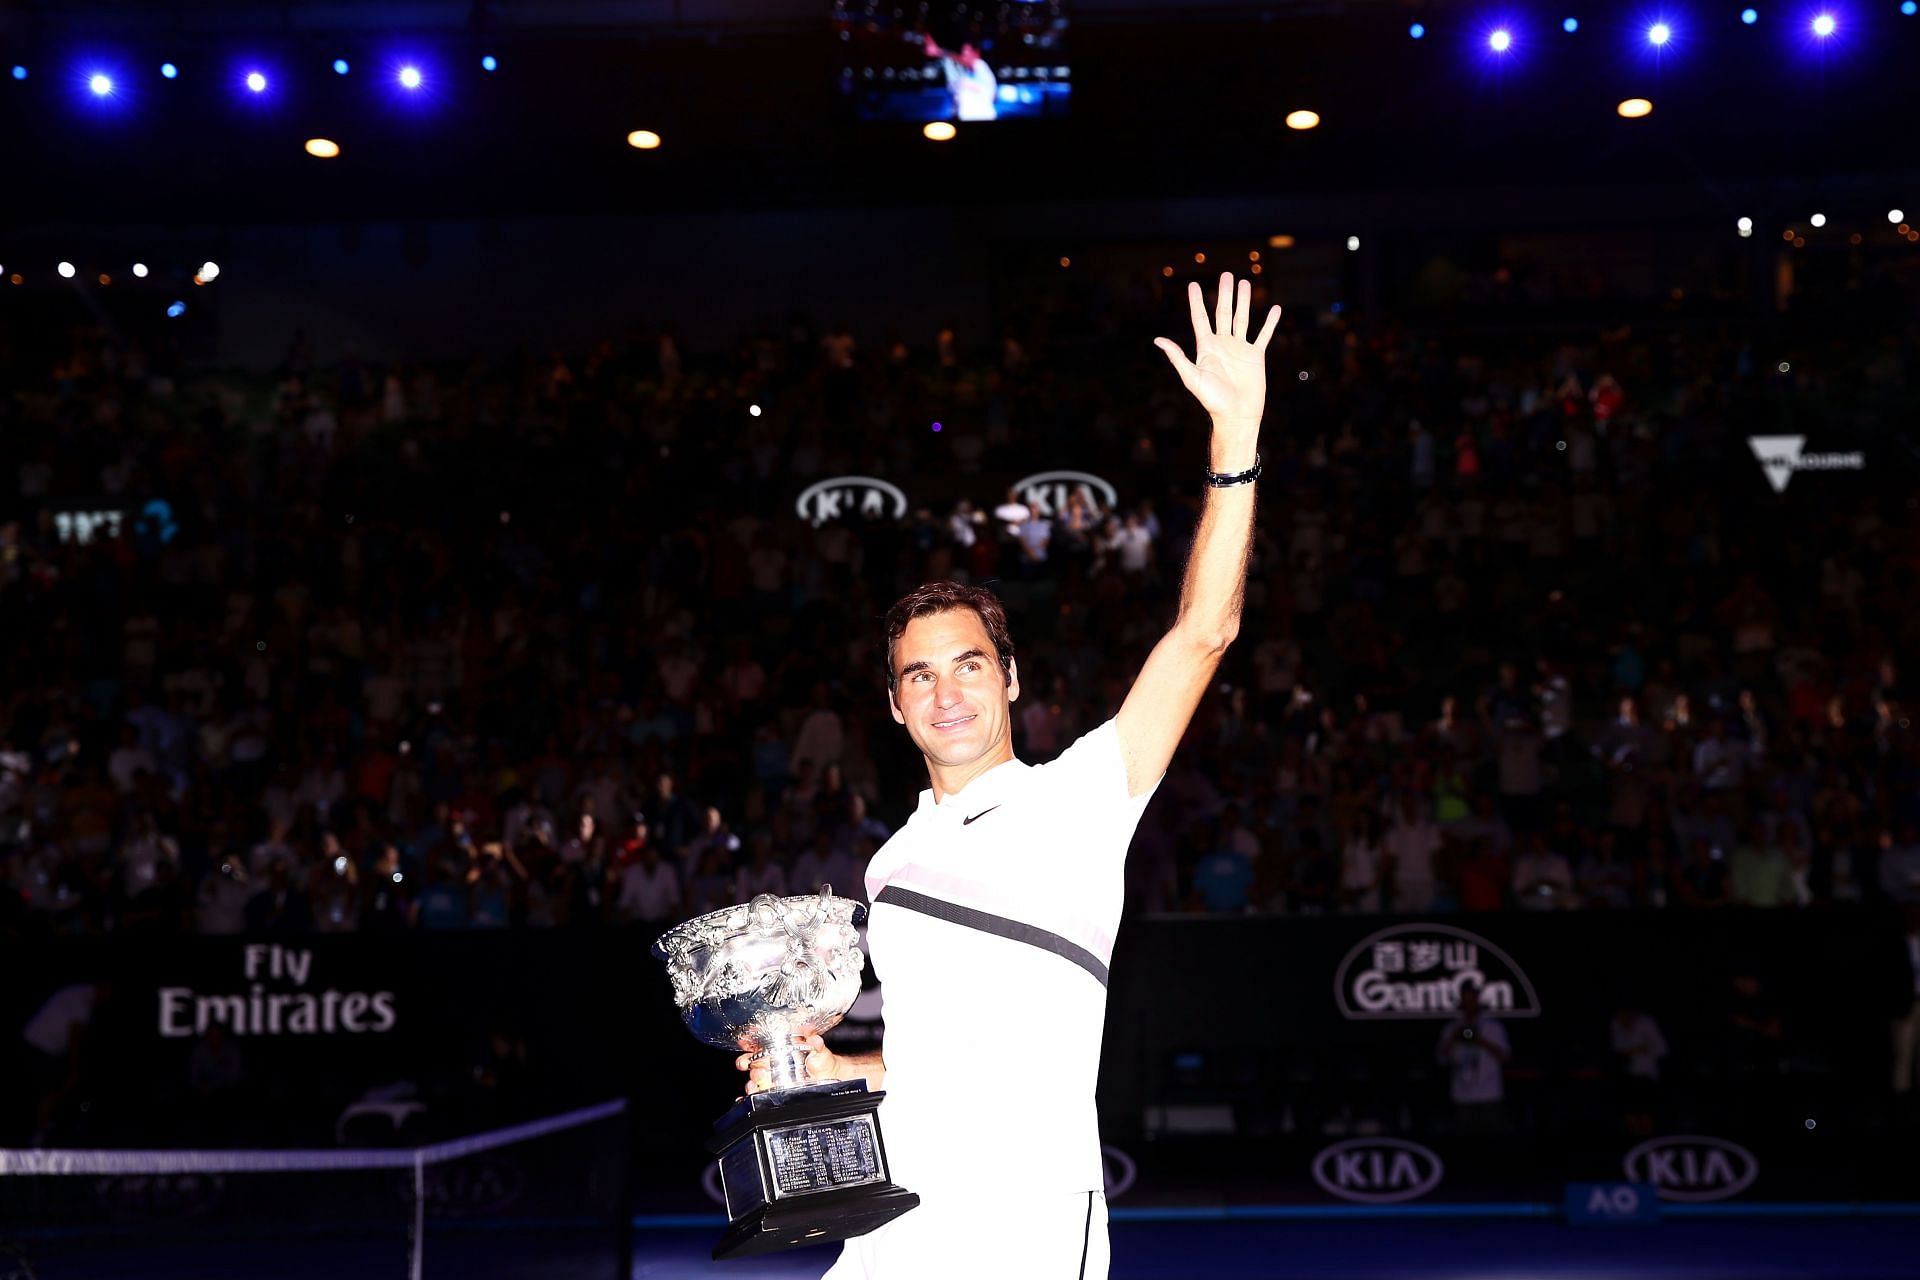 Six-time champion Roger Federer will miss out on his second consecutive Austraian Open